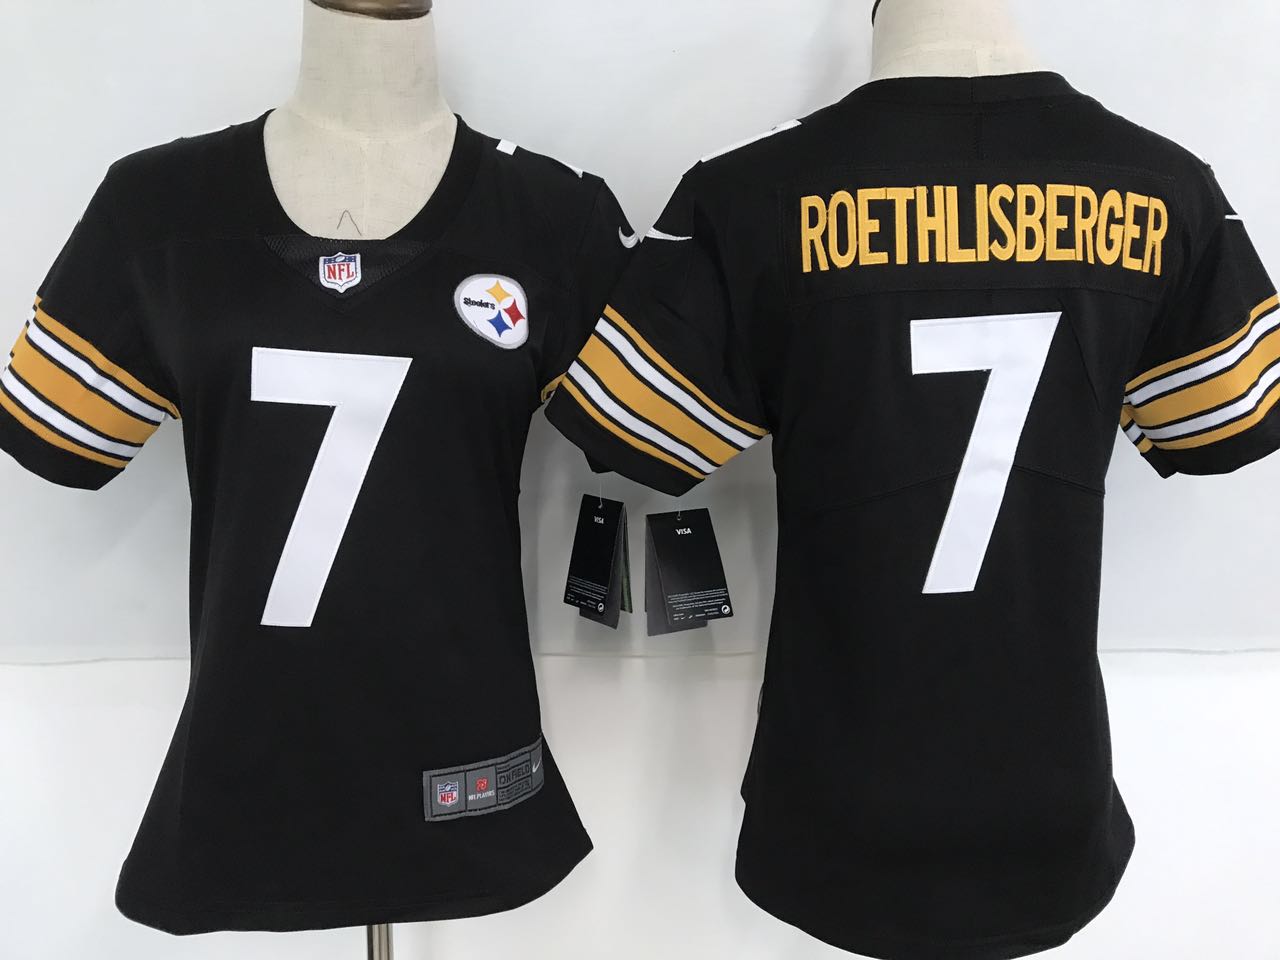 Women's Nike Pittsburgh Steelers #7 Ben Roethlisberger Black Team Color Stitched NFL Vapor Untouchable Limited Jersey